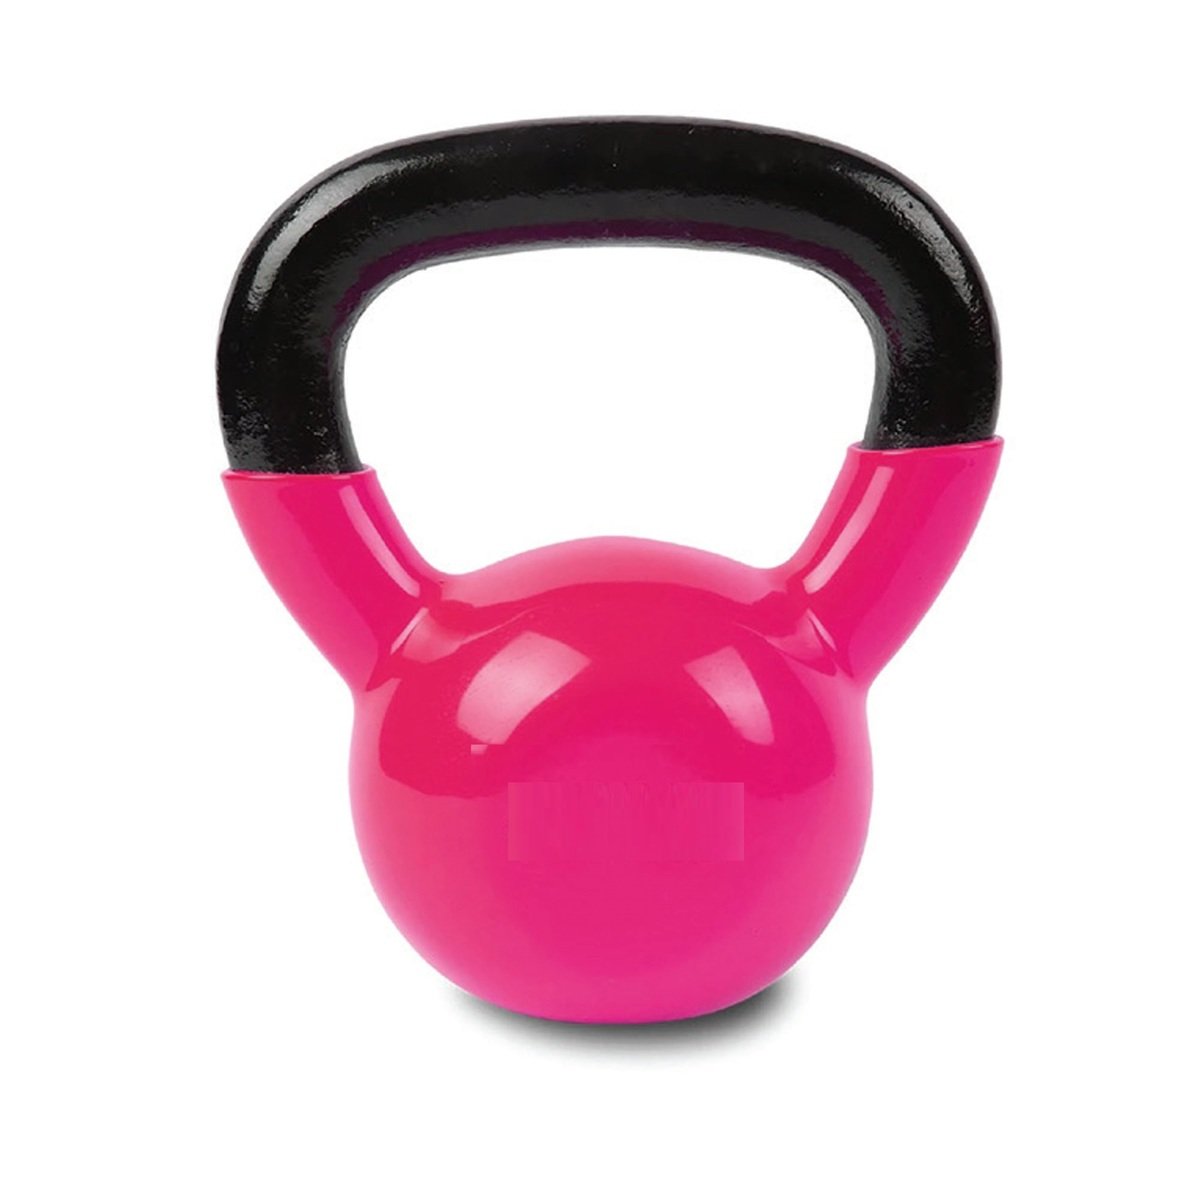 Sports Champion Kettlebell SC-80123 6Kg Assorted Color